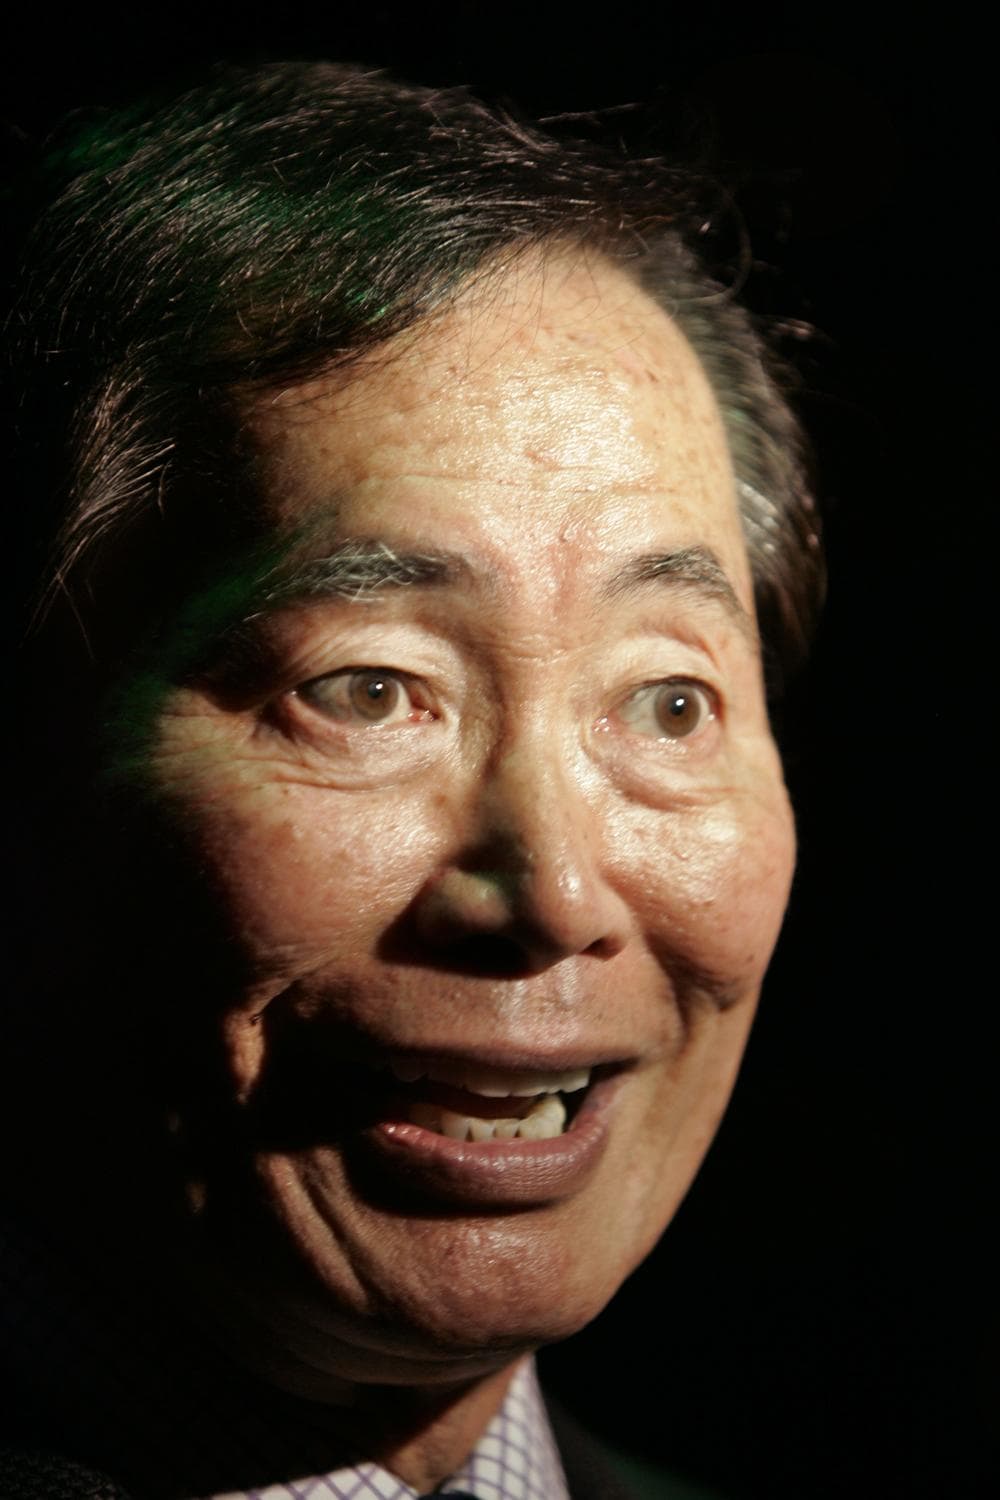 Actor George Takei, who played the role of helm officer Sulu in the original television series, Star Trek. (AP)